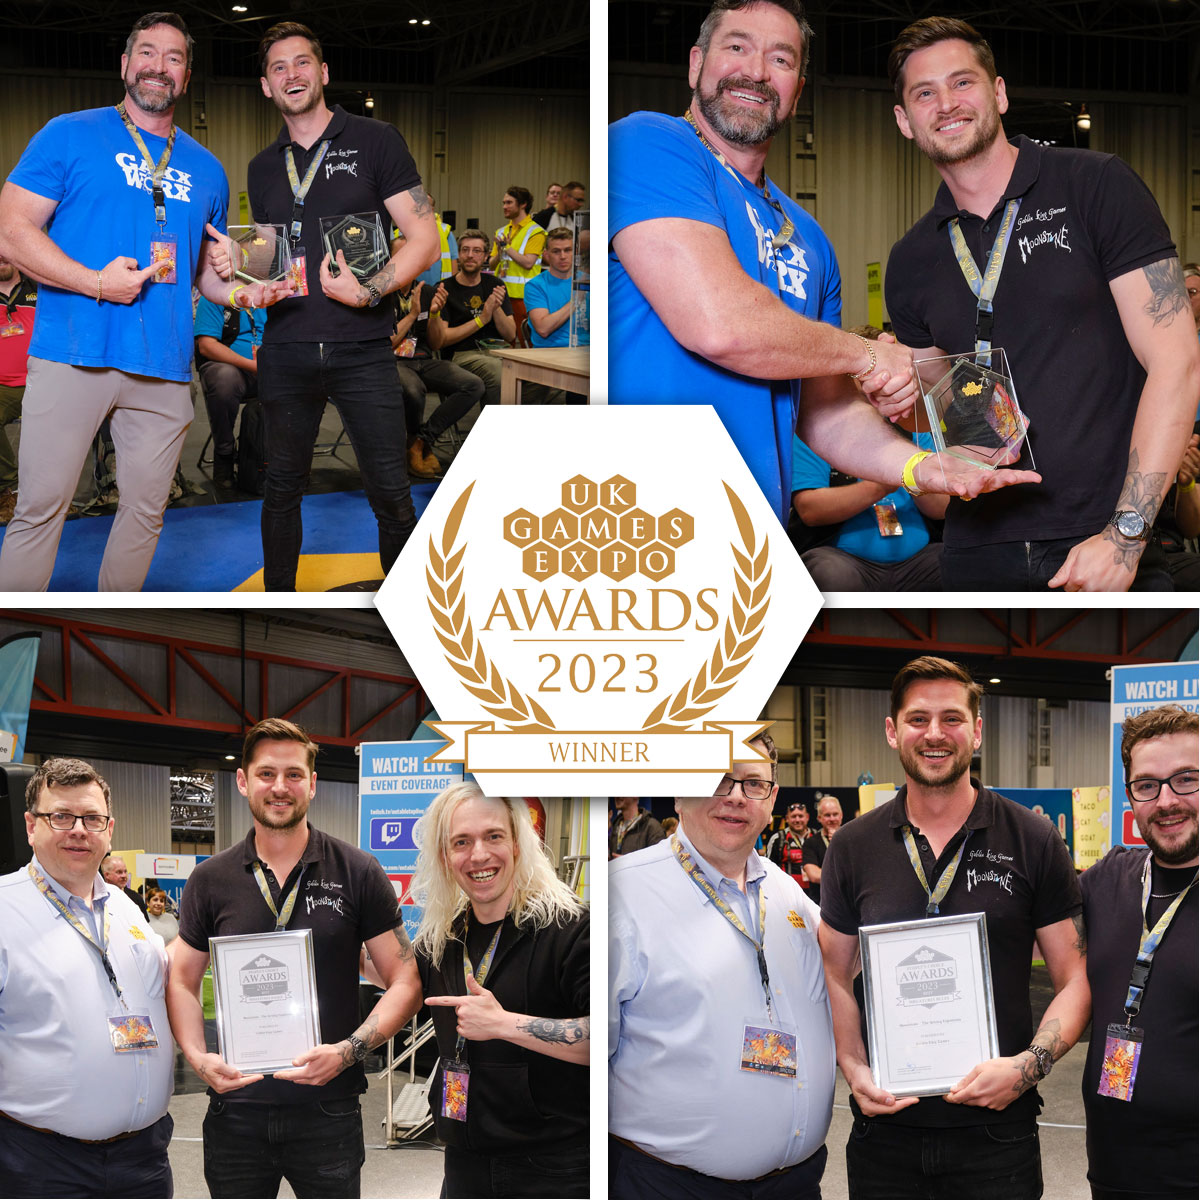 It's been a couple of weeks now but we're still buzzing about winning *four* UK games EXPO awards 🥰 We won the Judges and Peoples Choice Awards for Best Miniatures Range AND Best Miniatures Rules 🥳 #PlayMoonstone #MoonstoneTheGame #MoonstoneMiniatures #GoblinKingGames